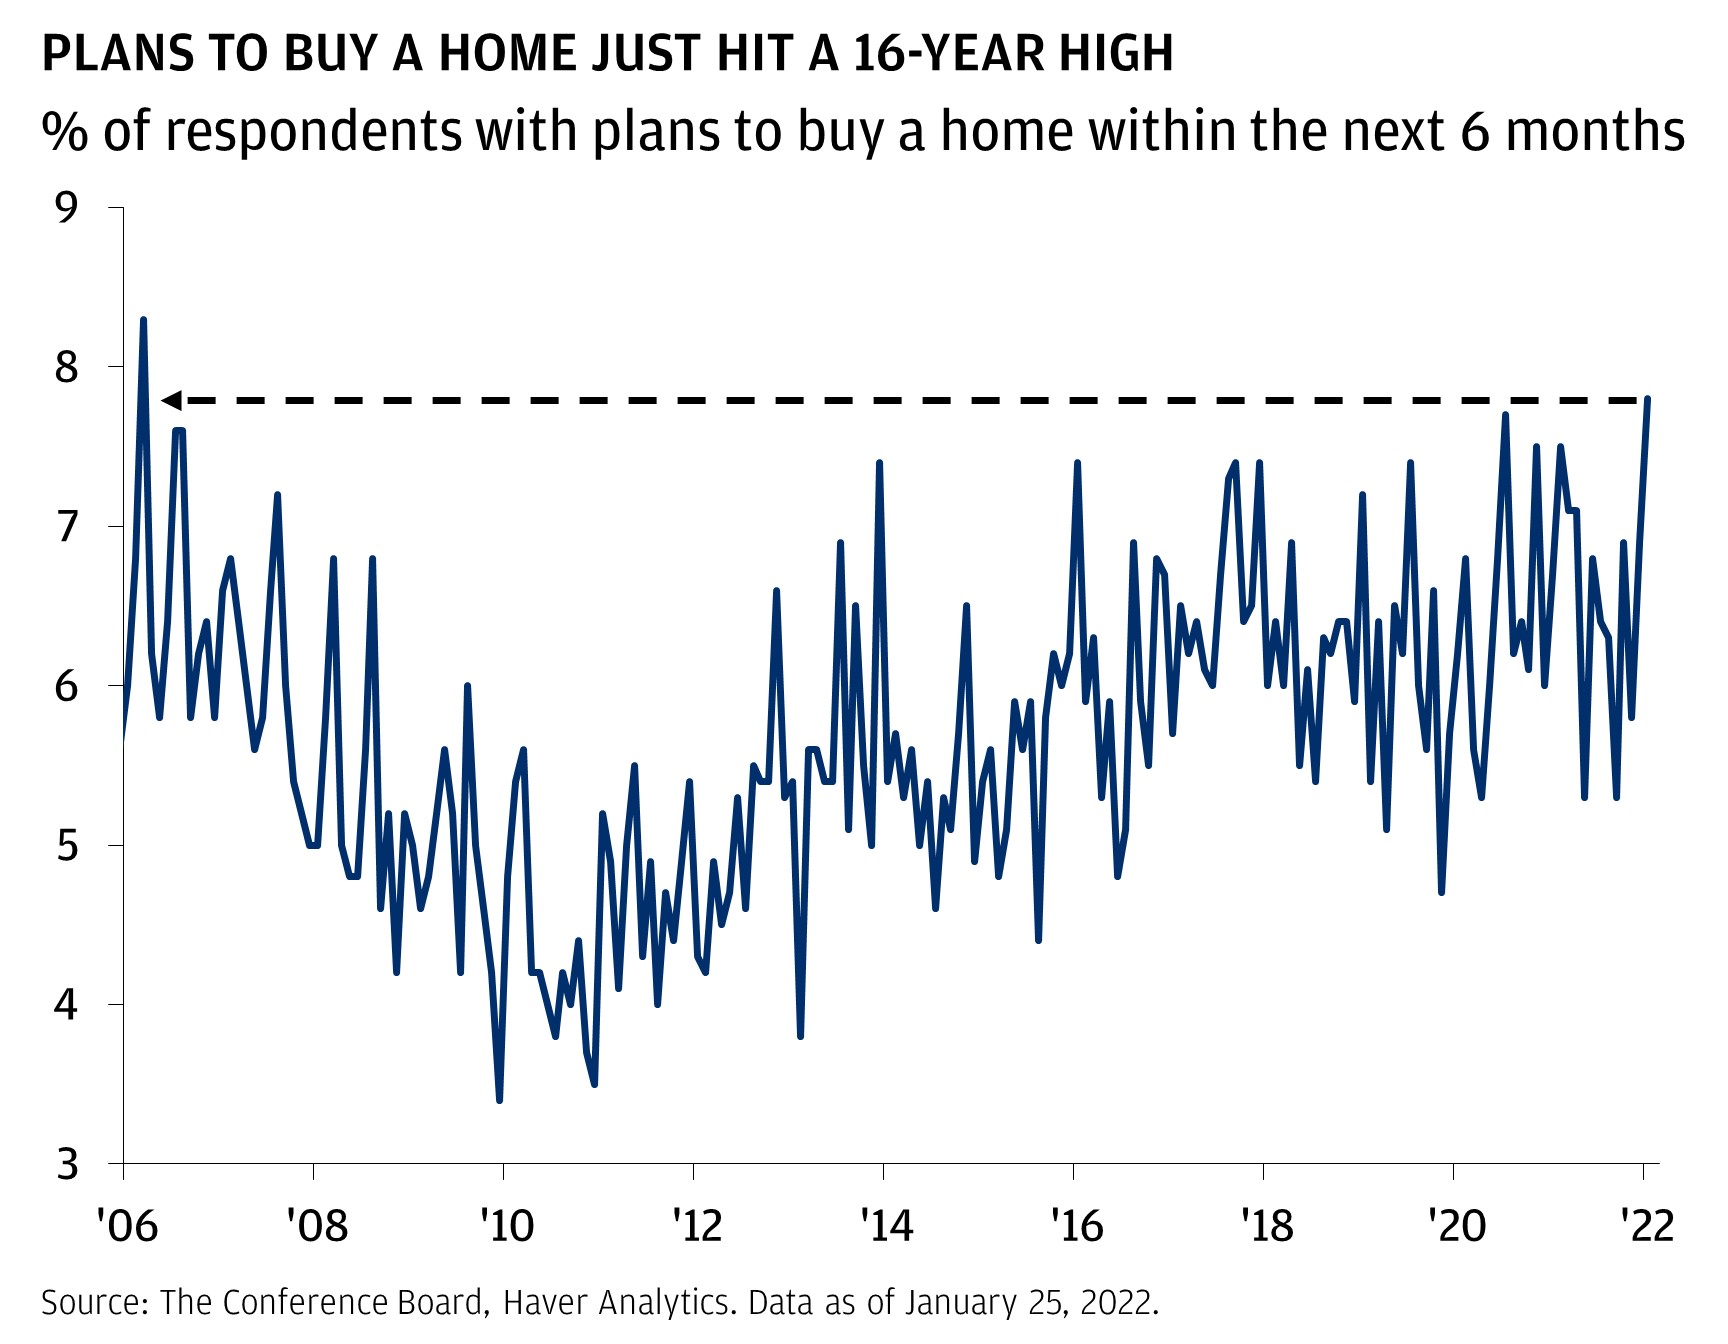 Plans to buy a home just hit a 16-year high